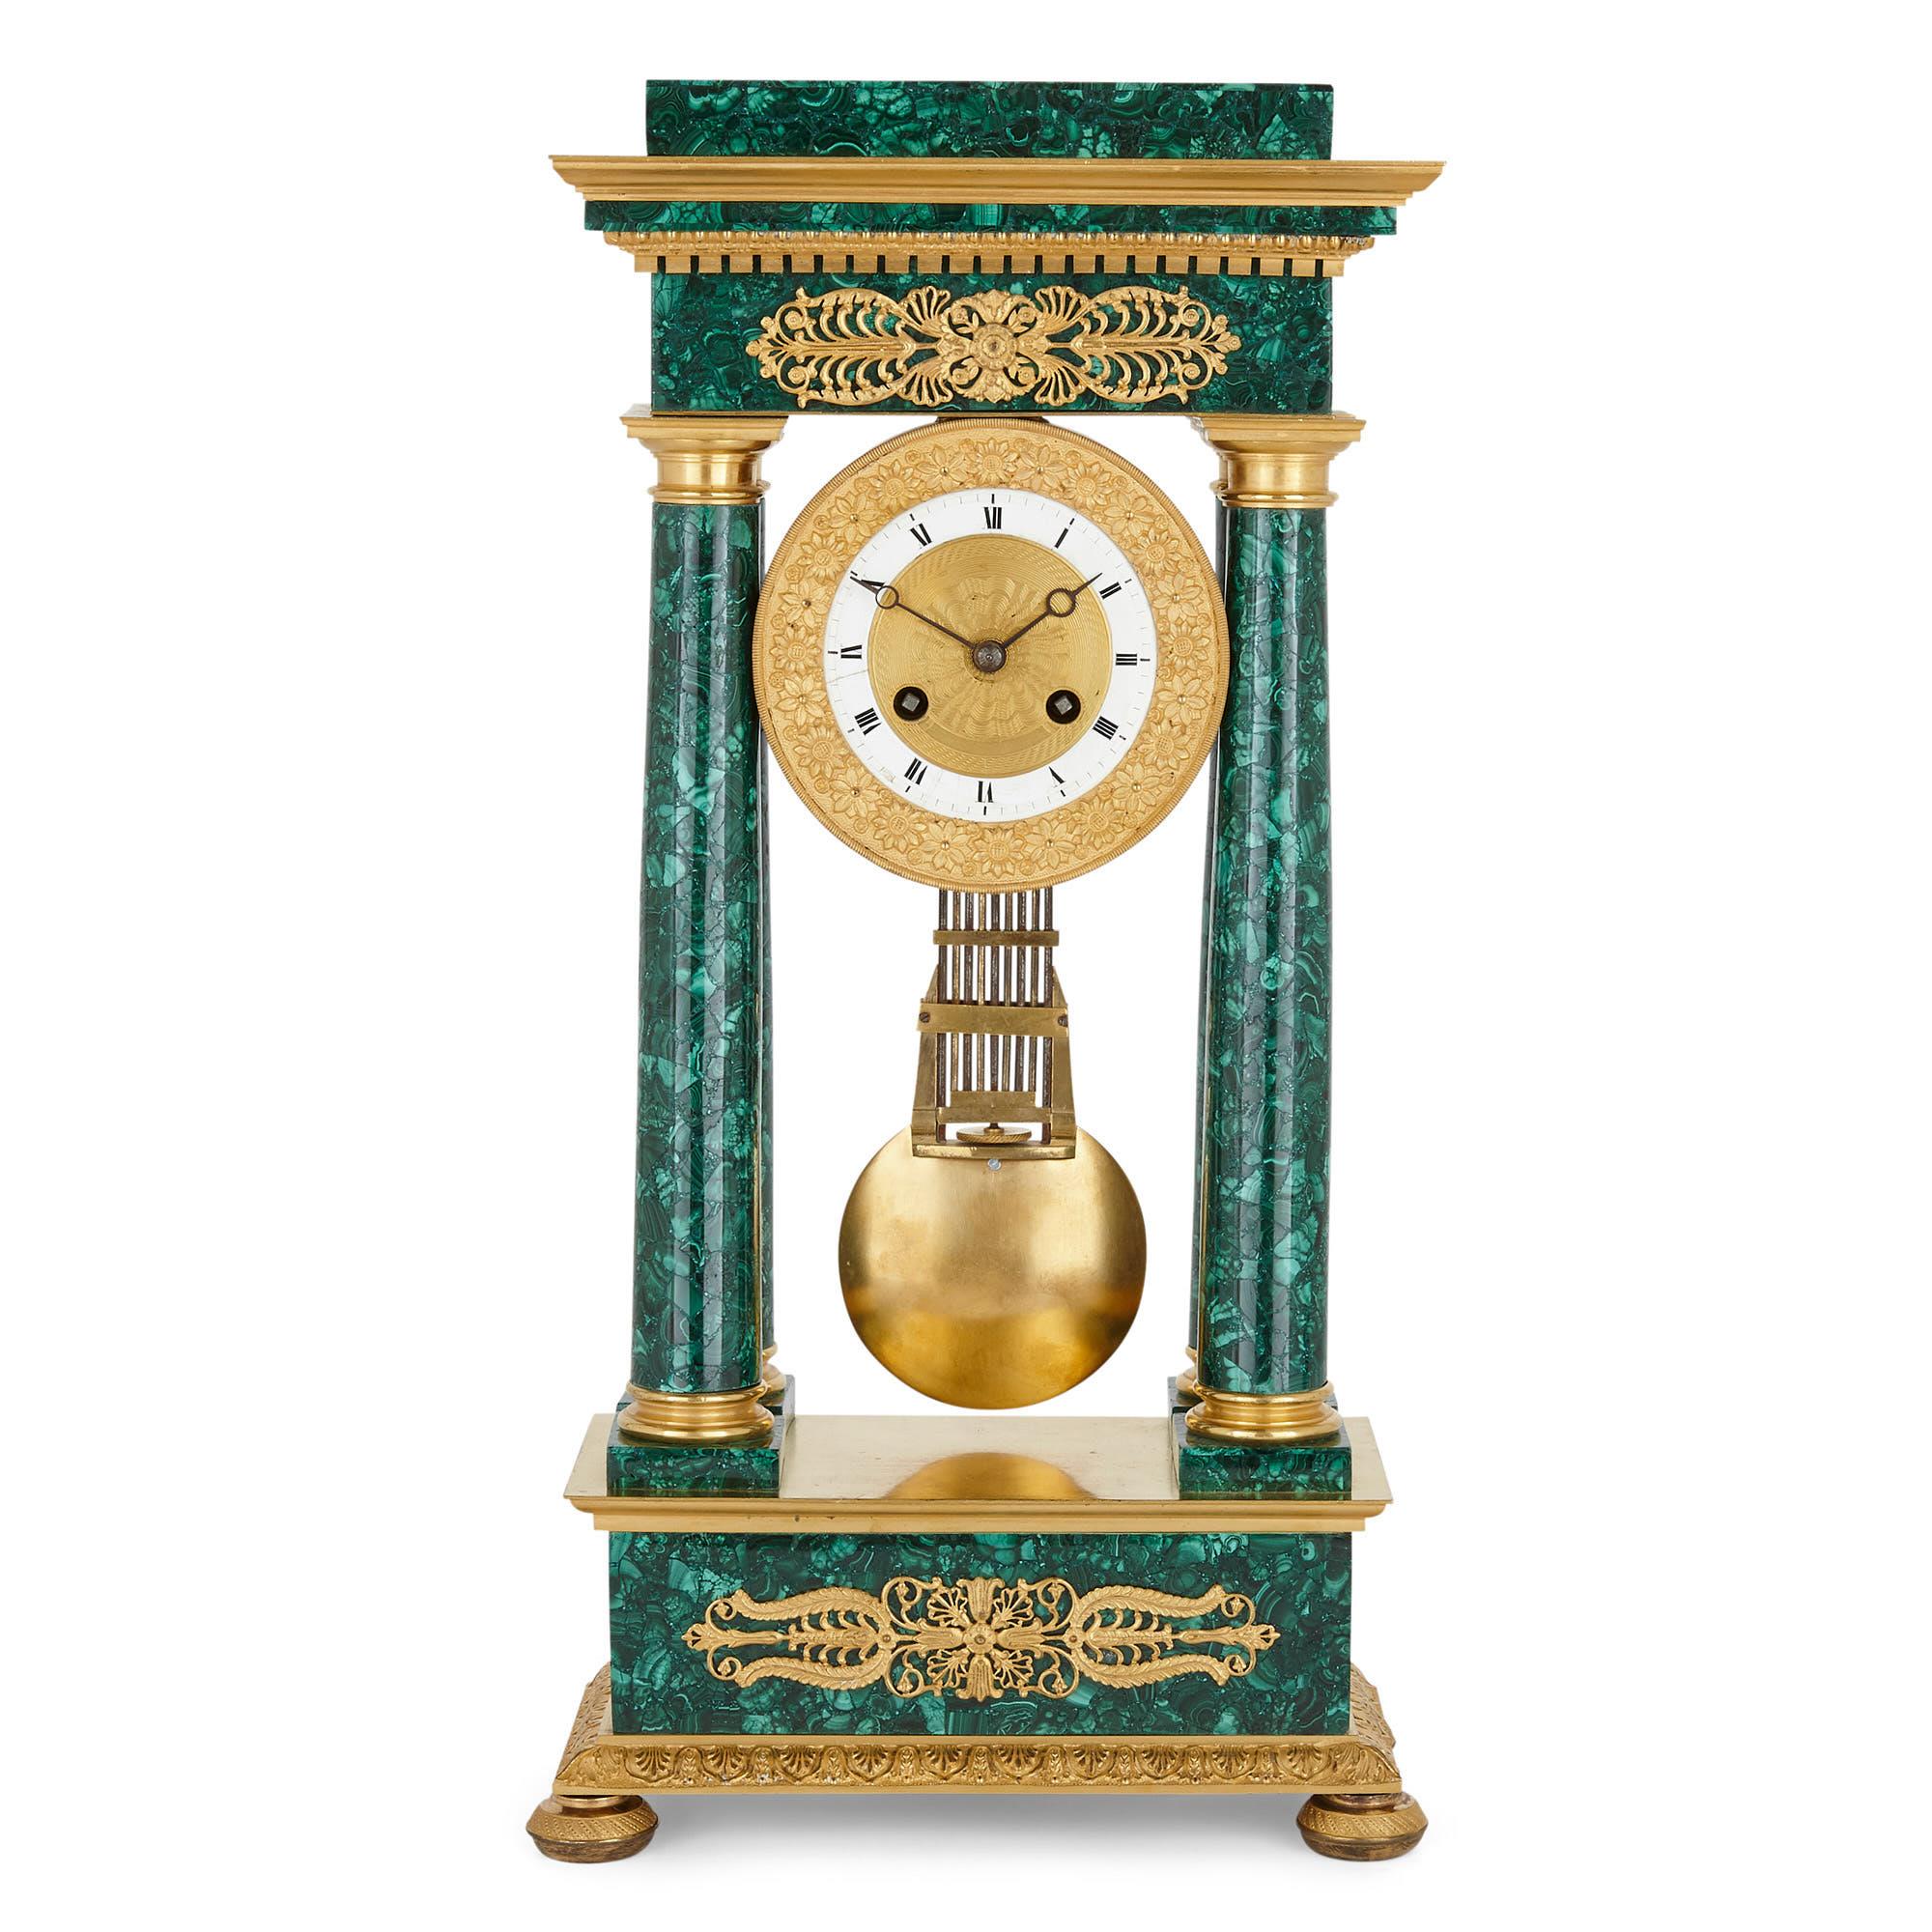 Empire period neoclassical malachite and gilt bronze mantel clock
French, early 19th century
Dimensions: Height 48cm, width 23.5cm, depth 11cm

This mantel clock was finely crafted in the Empire period, wrought from ormolu and a later malachite